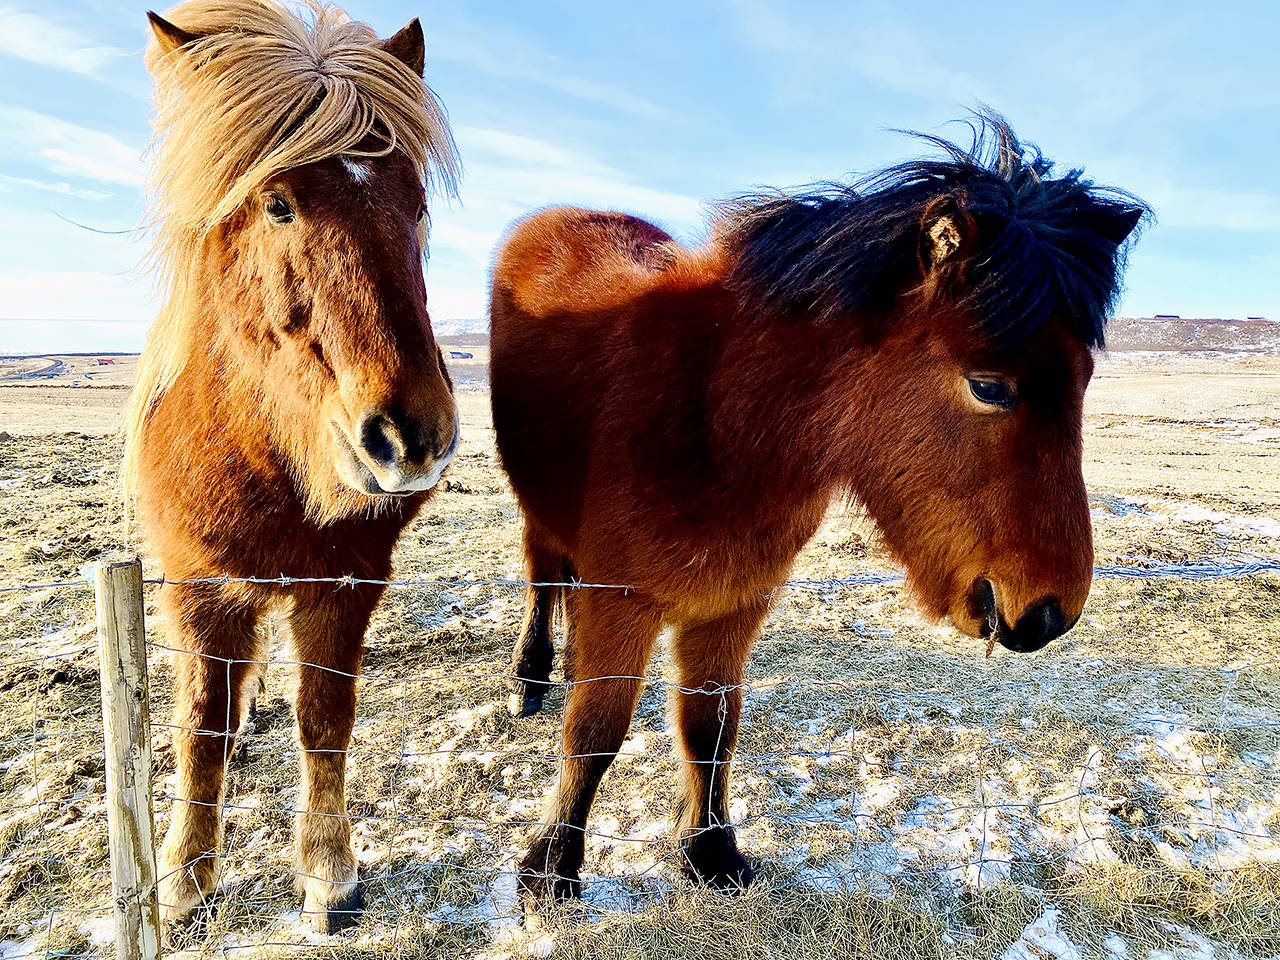 Iceland’s fuzzy horses are a roadside attraction and very people-friendly. (Andrea Brown / The Herald)